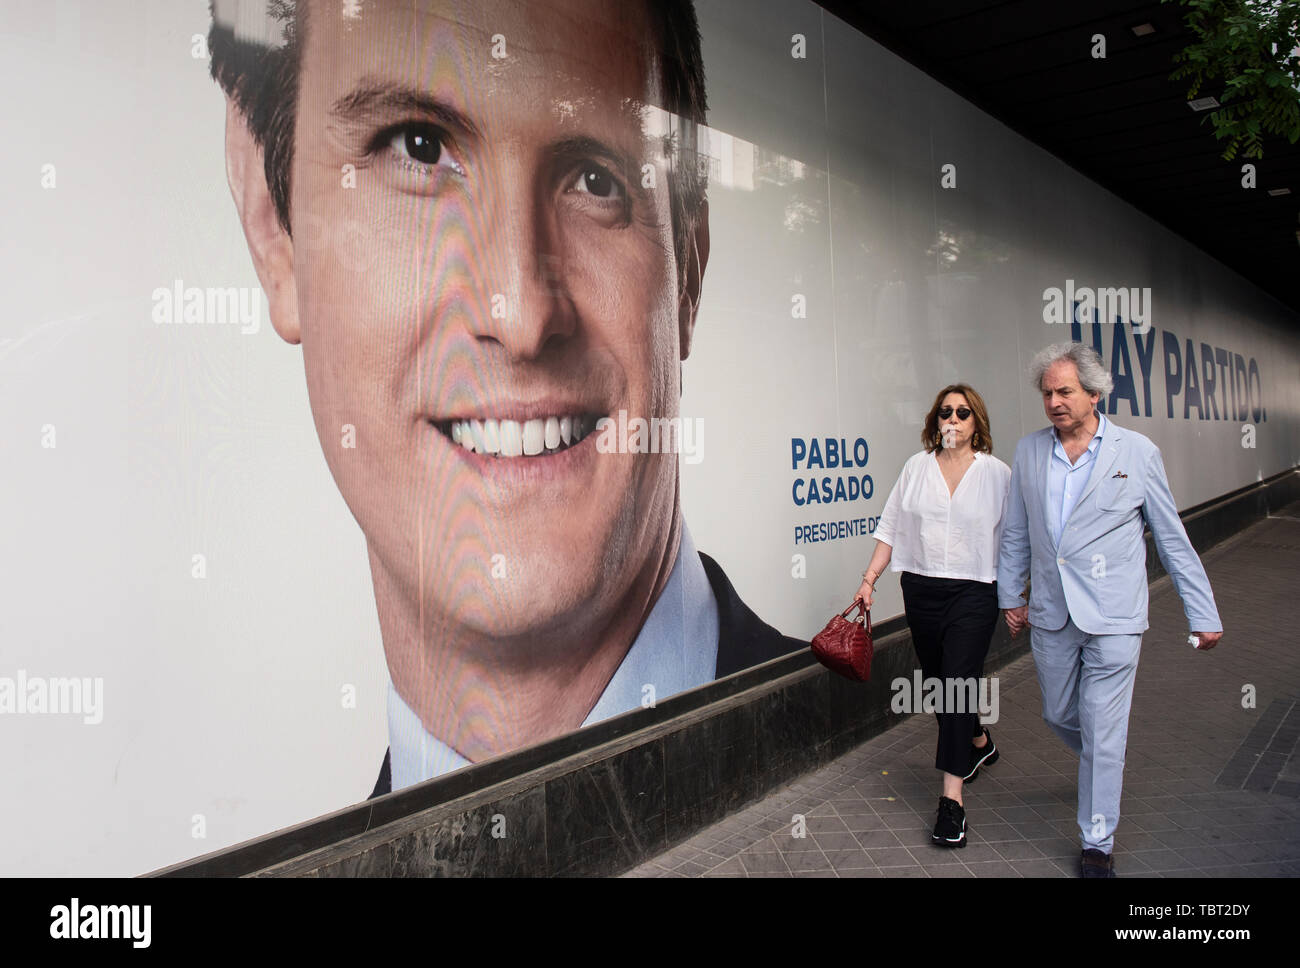 Pedestrians walk past a large image of Pablo Casado, leader of Partido Popular (PP) at the party's headquarters ahead of the local, regional and European elections. Stock Photo